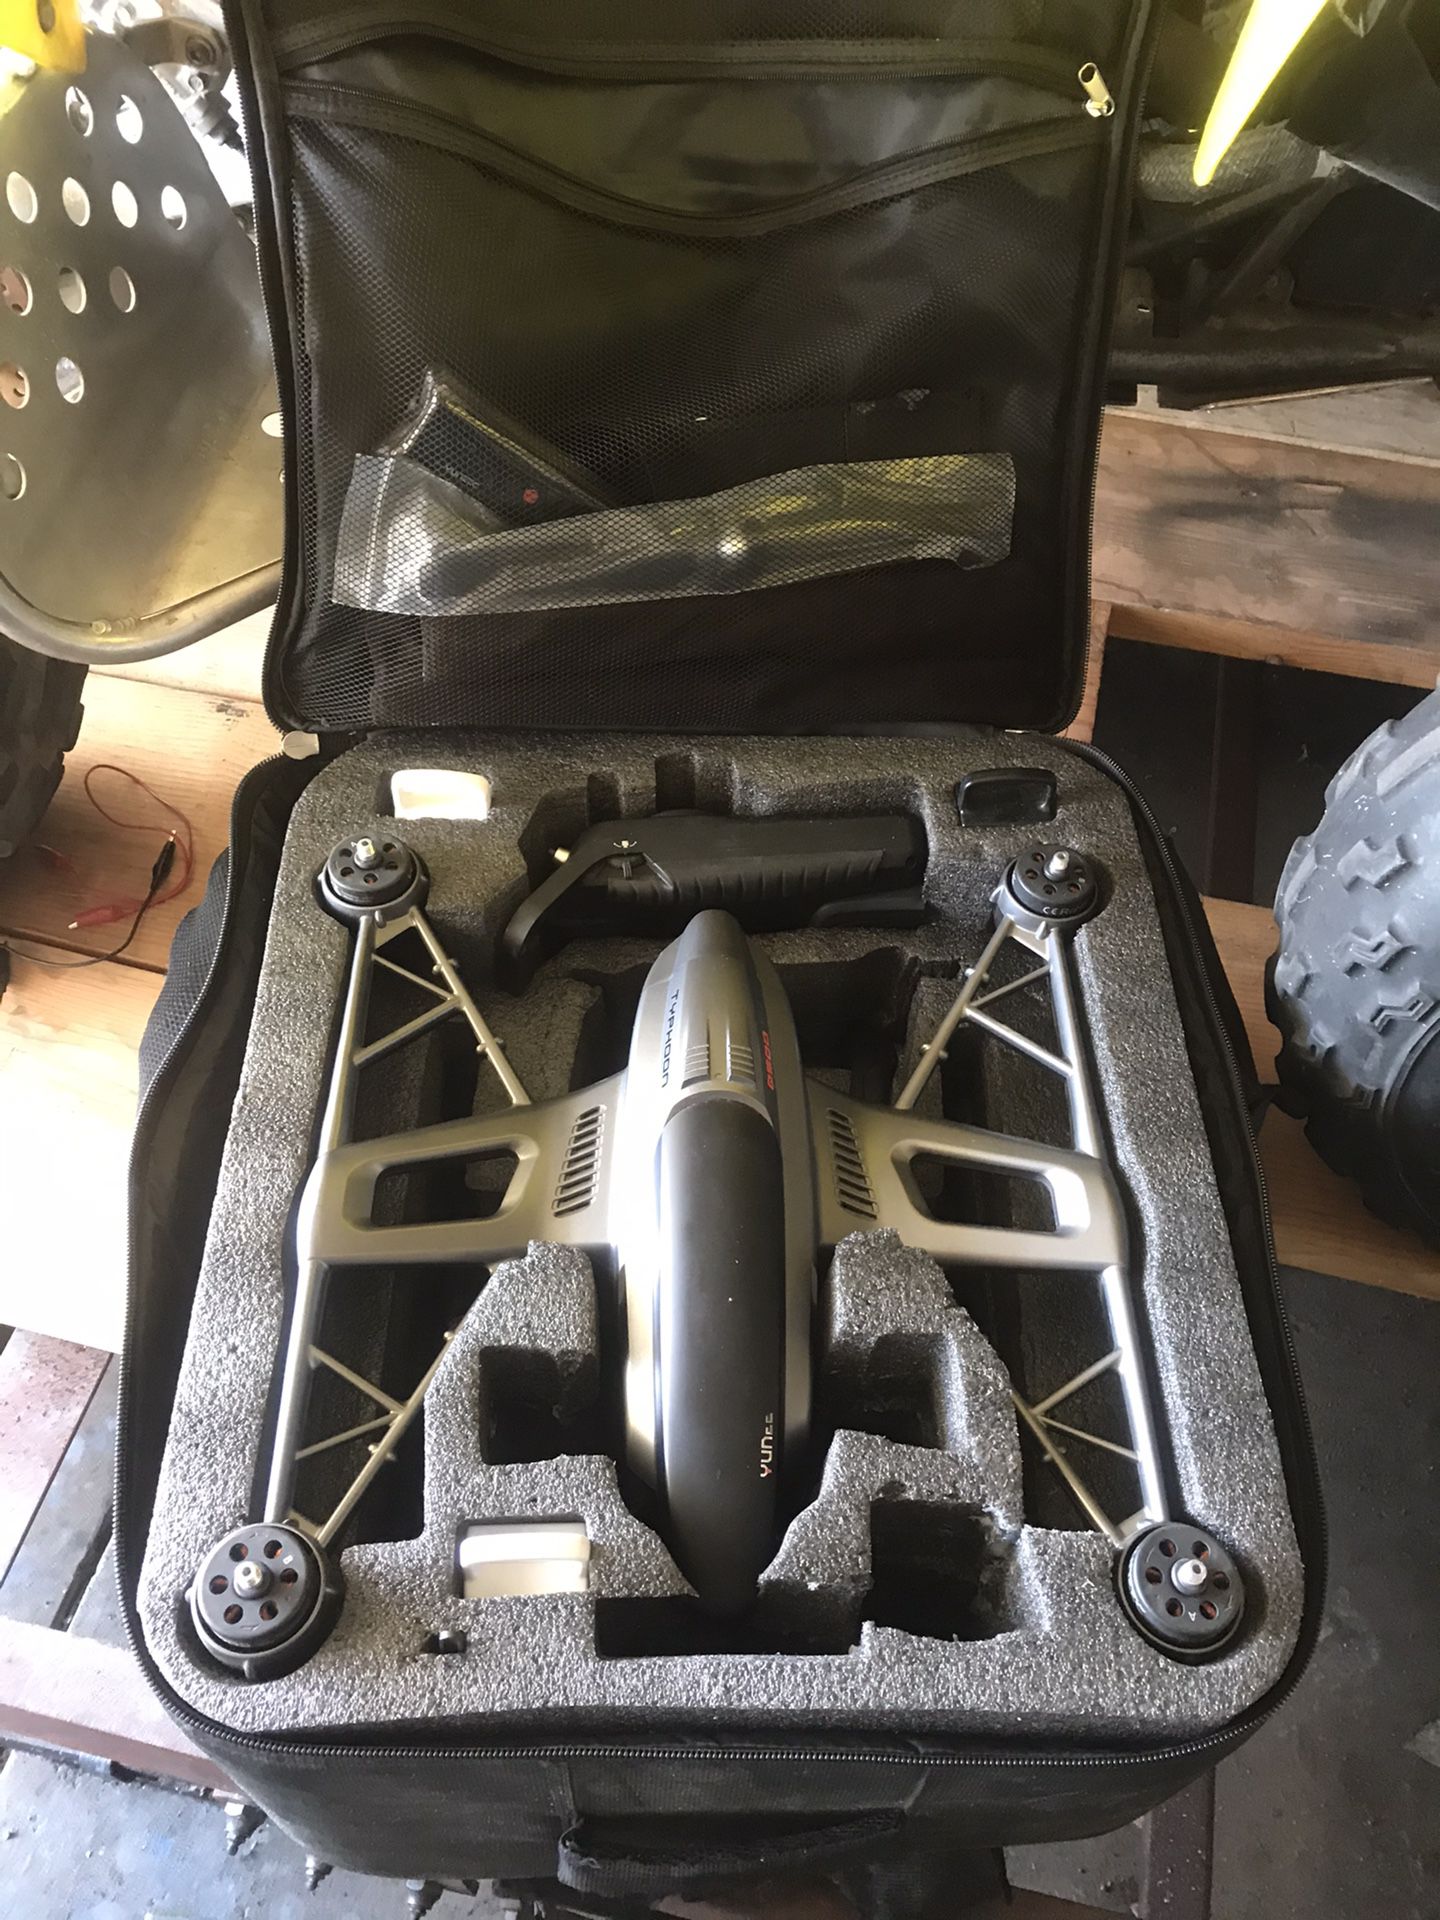 Yuneec Typhoon 4K drone with extras